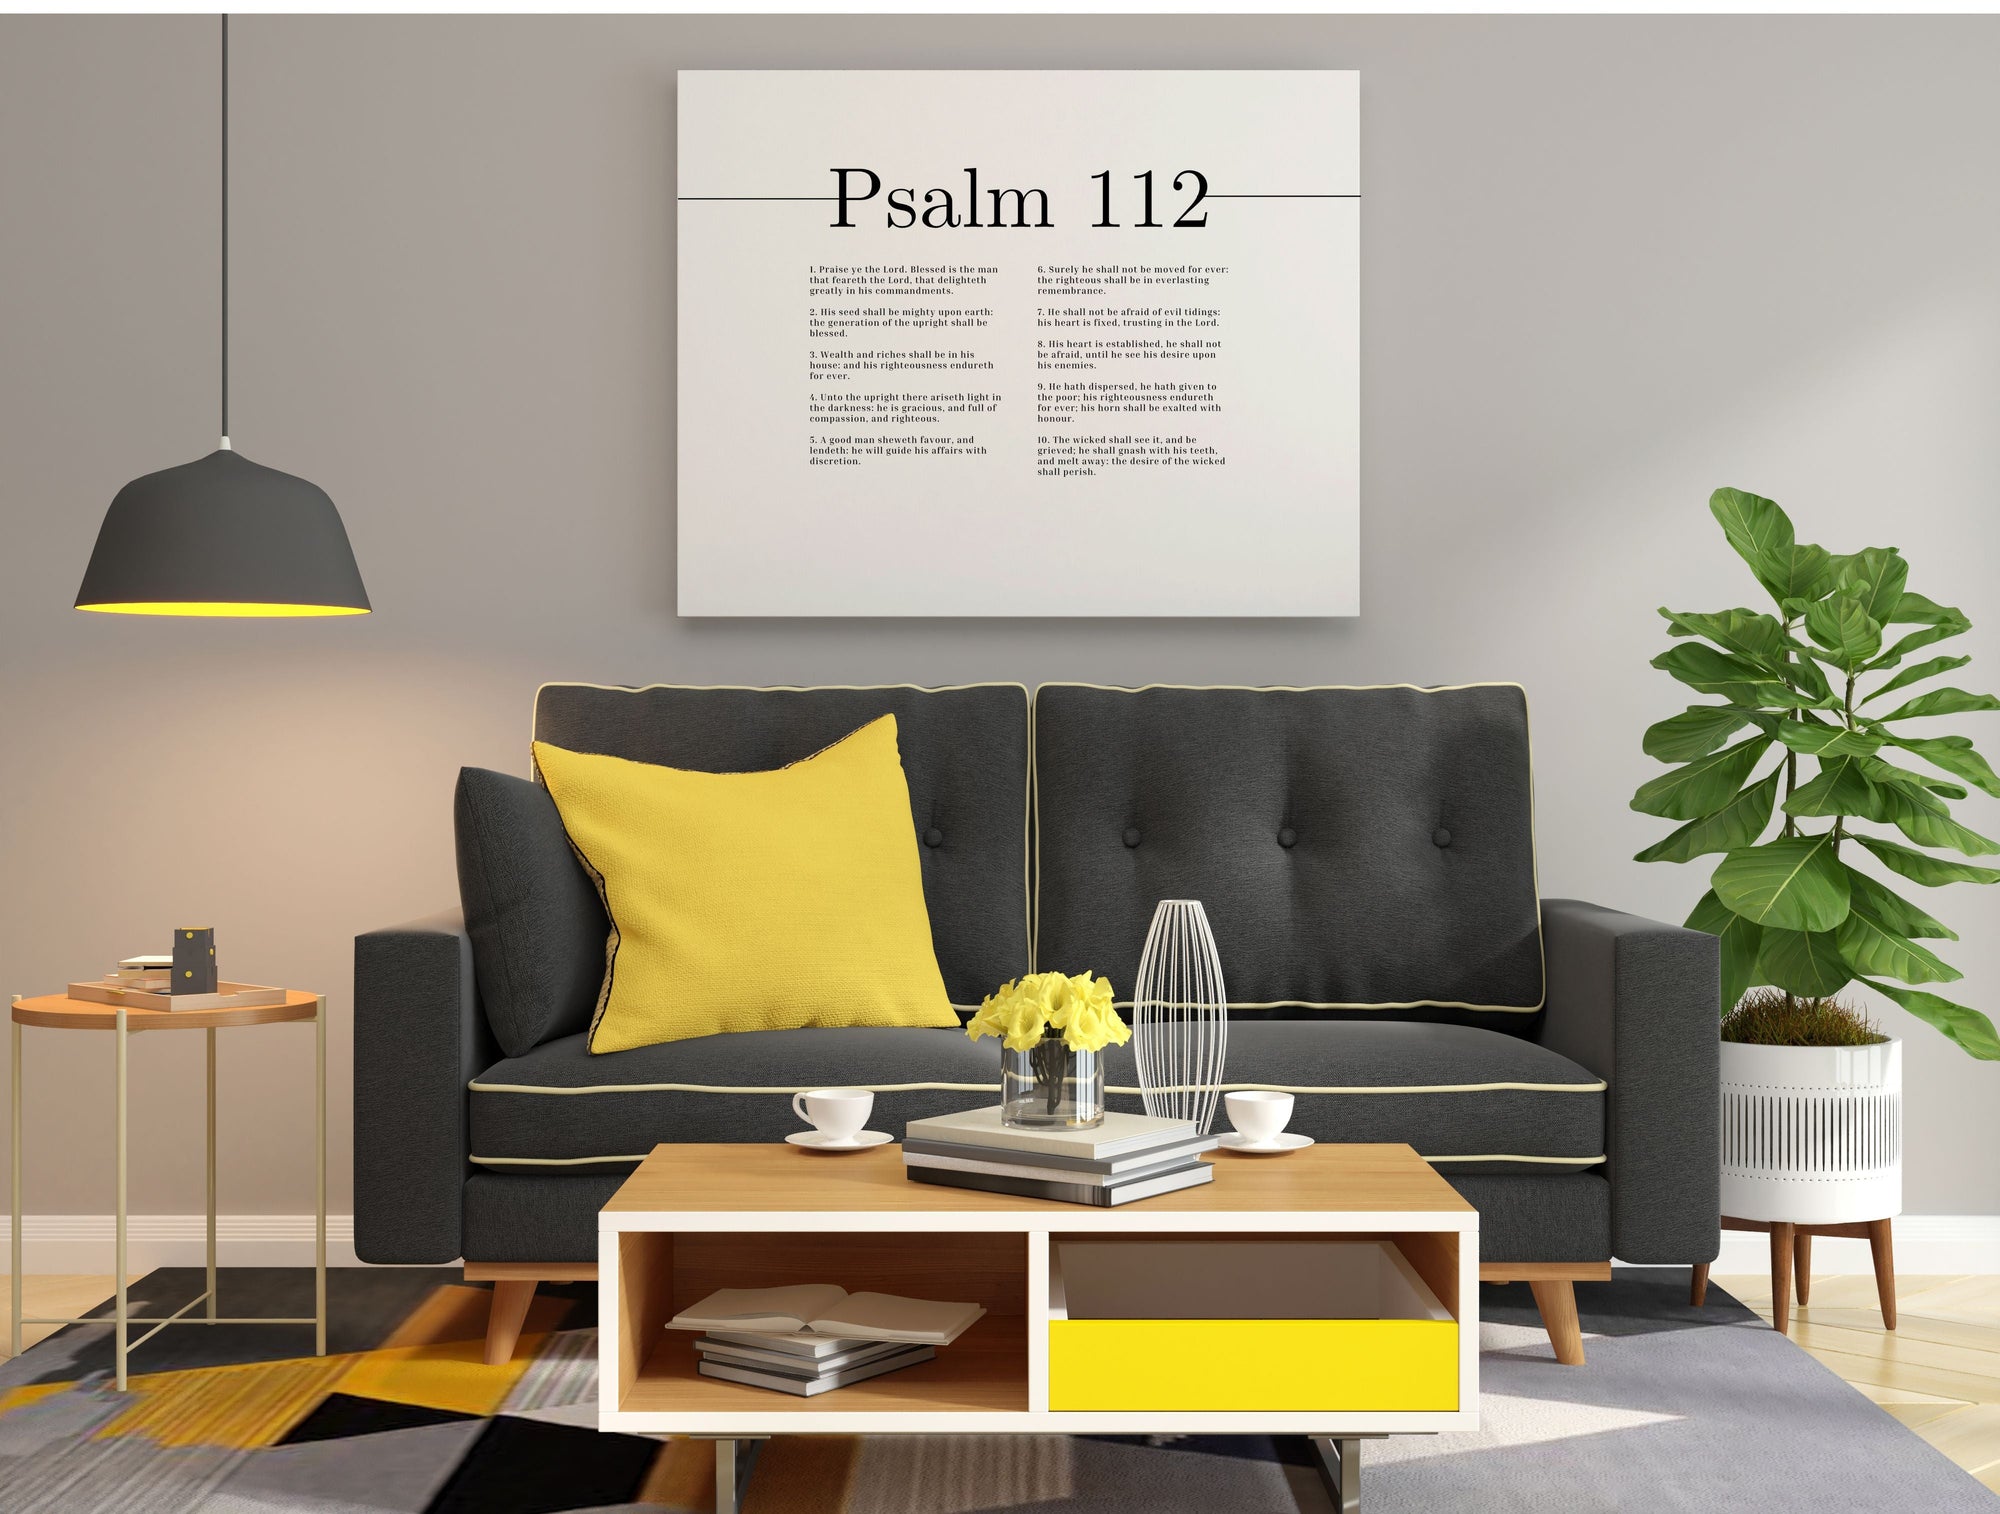 Scripture Walls Everlasting Remembrance Psalm 112 Bible Verse Canvas Christian Wall Art Ready to Hang Unframed-Express Your Love Gifts